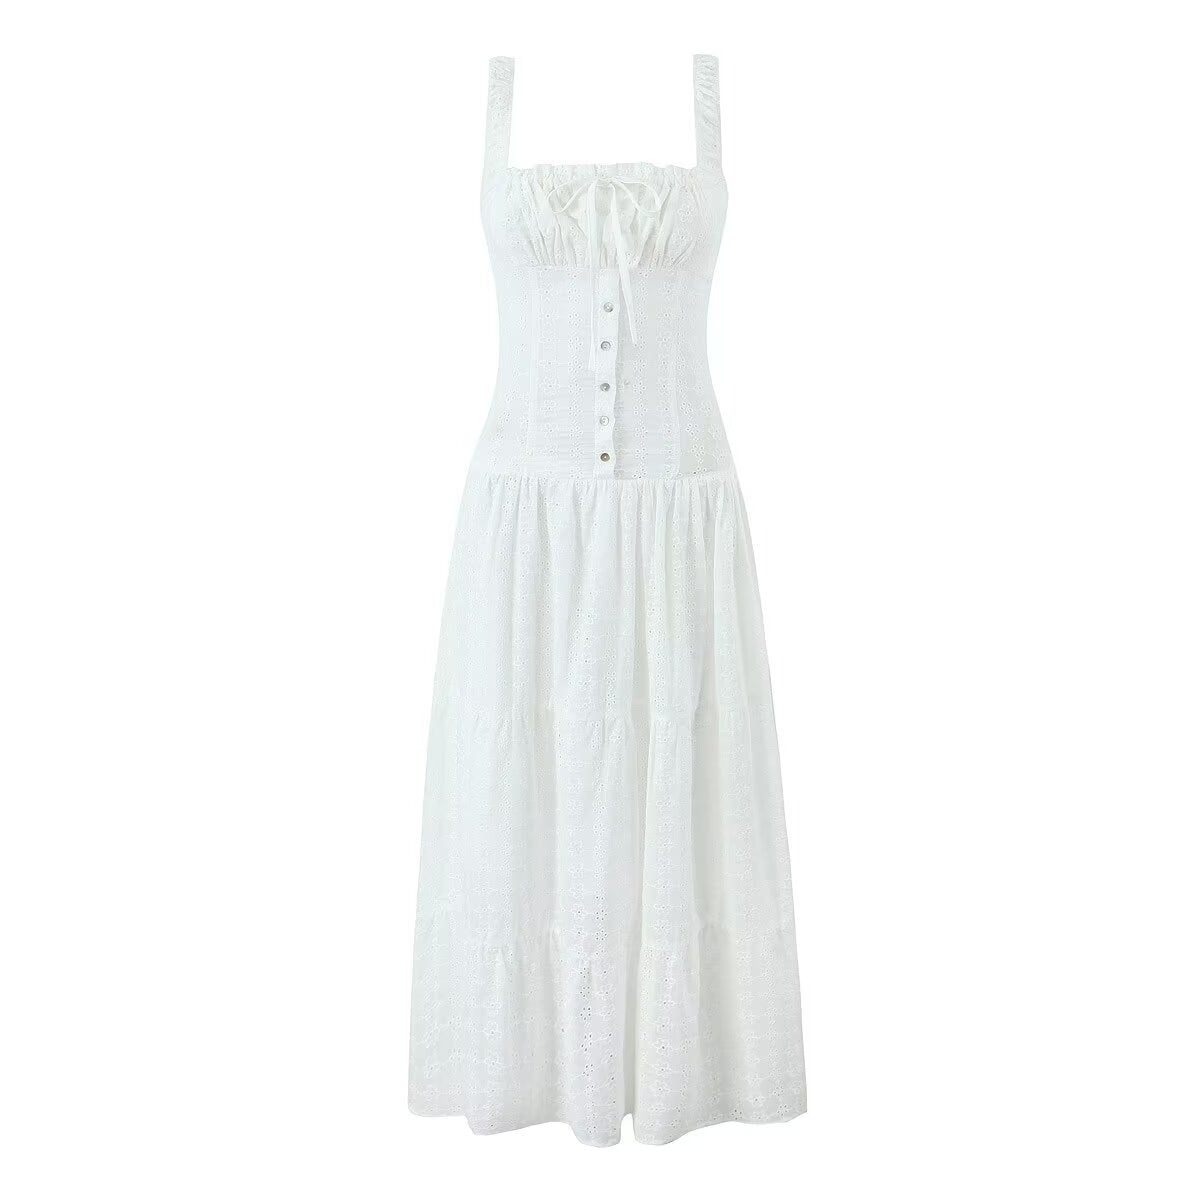 carla dress white embroidered floral girly buttonedetails